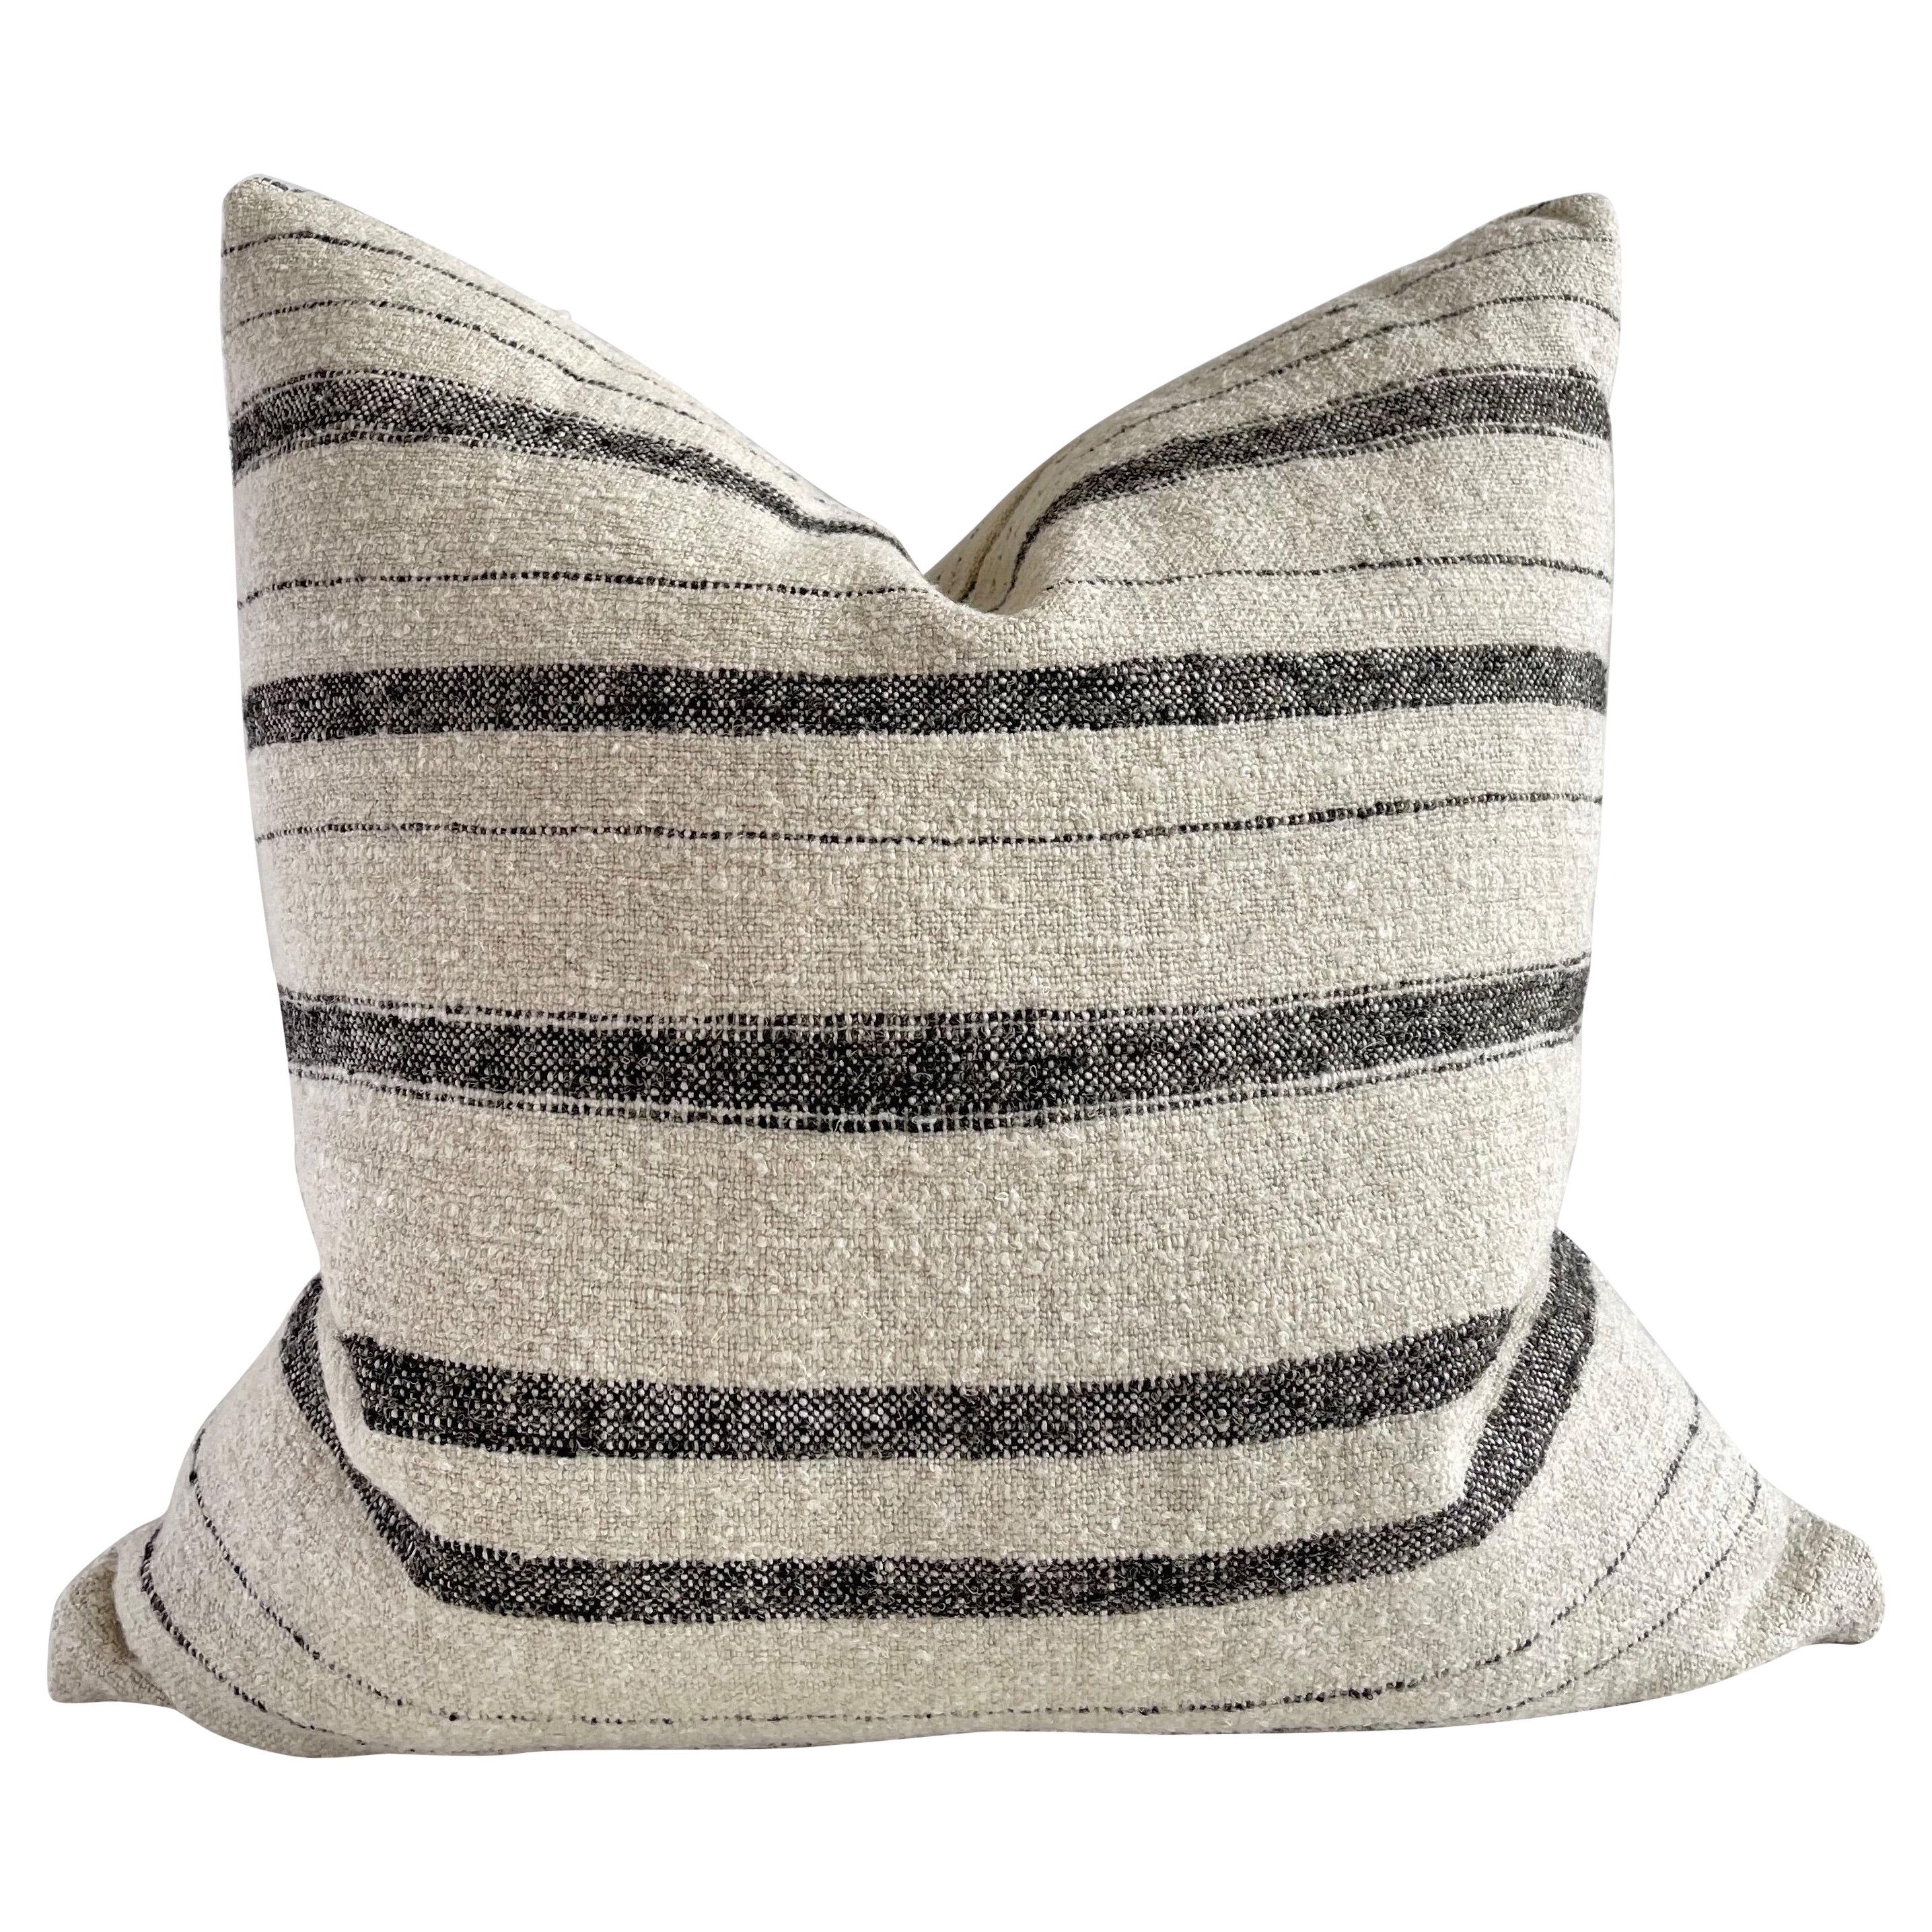 Bloom Home Inc Belgian Linen and Cotton Pillow For Sale